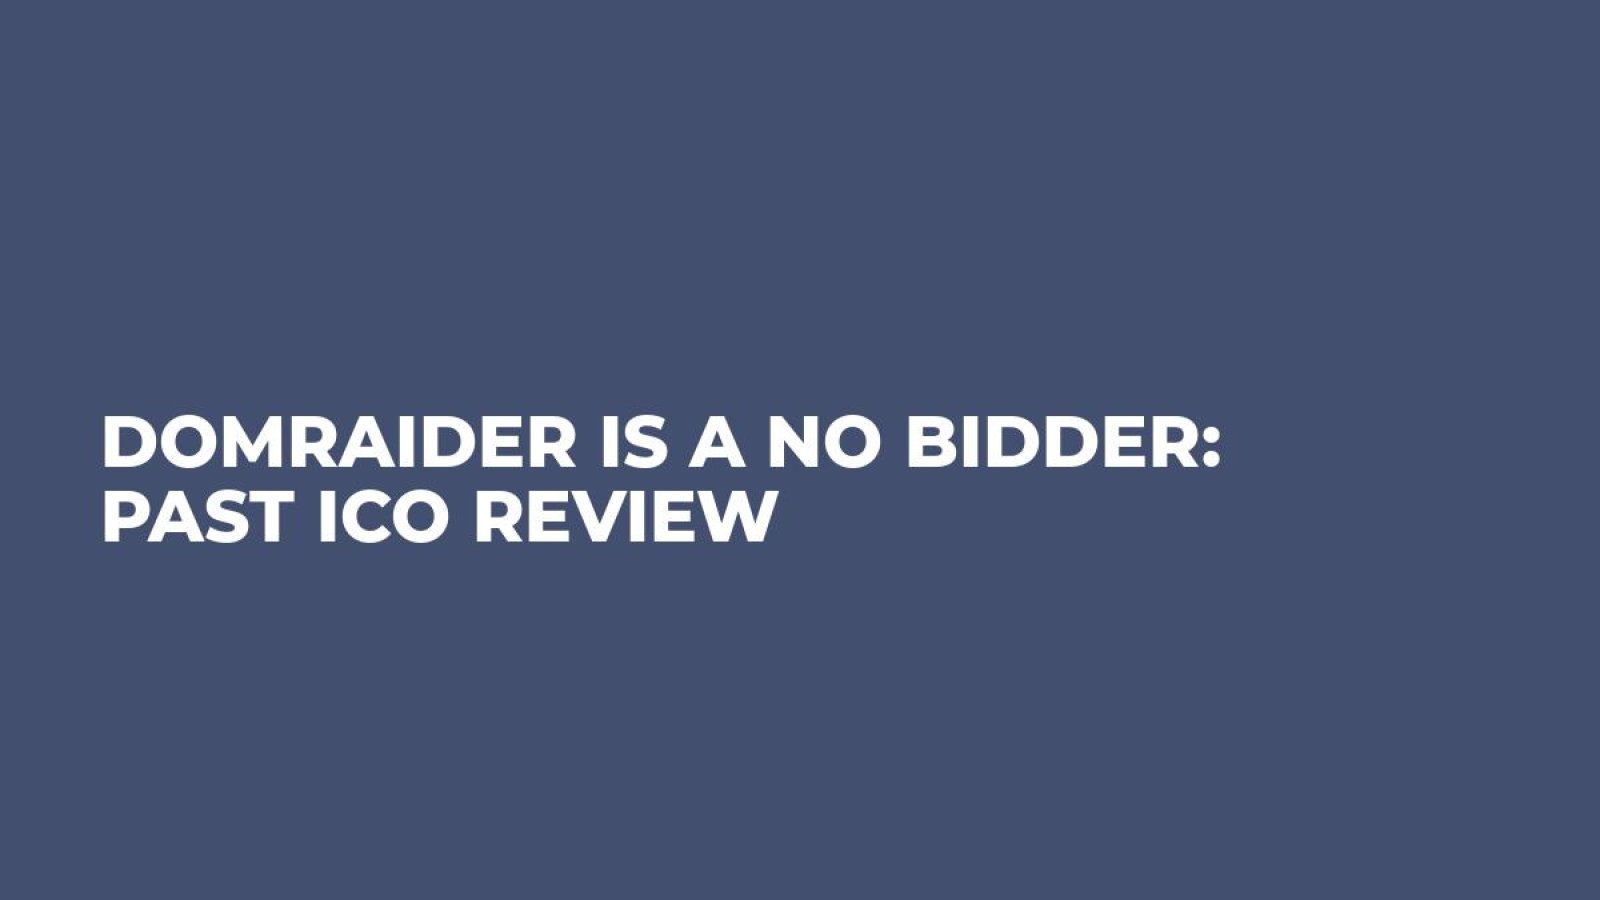 DomRaider is a no Bidder: Past ICO Review